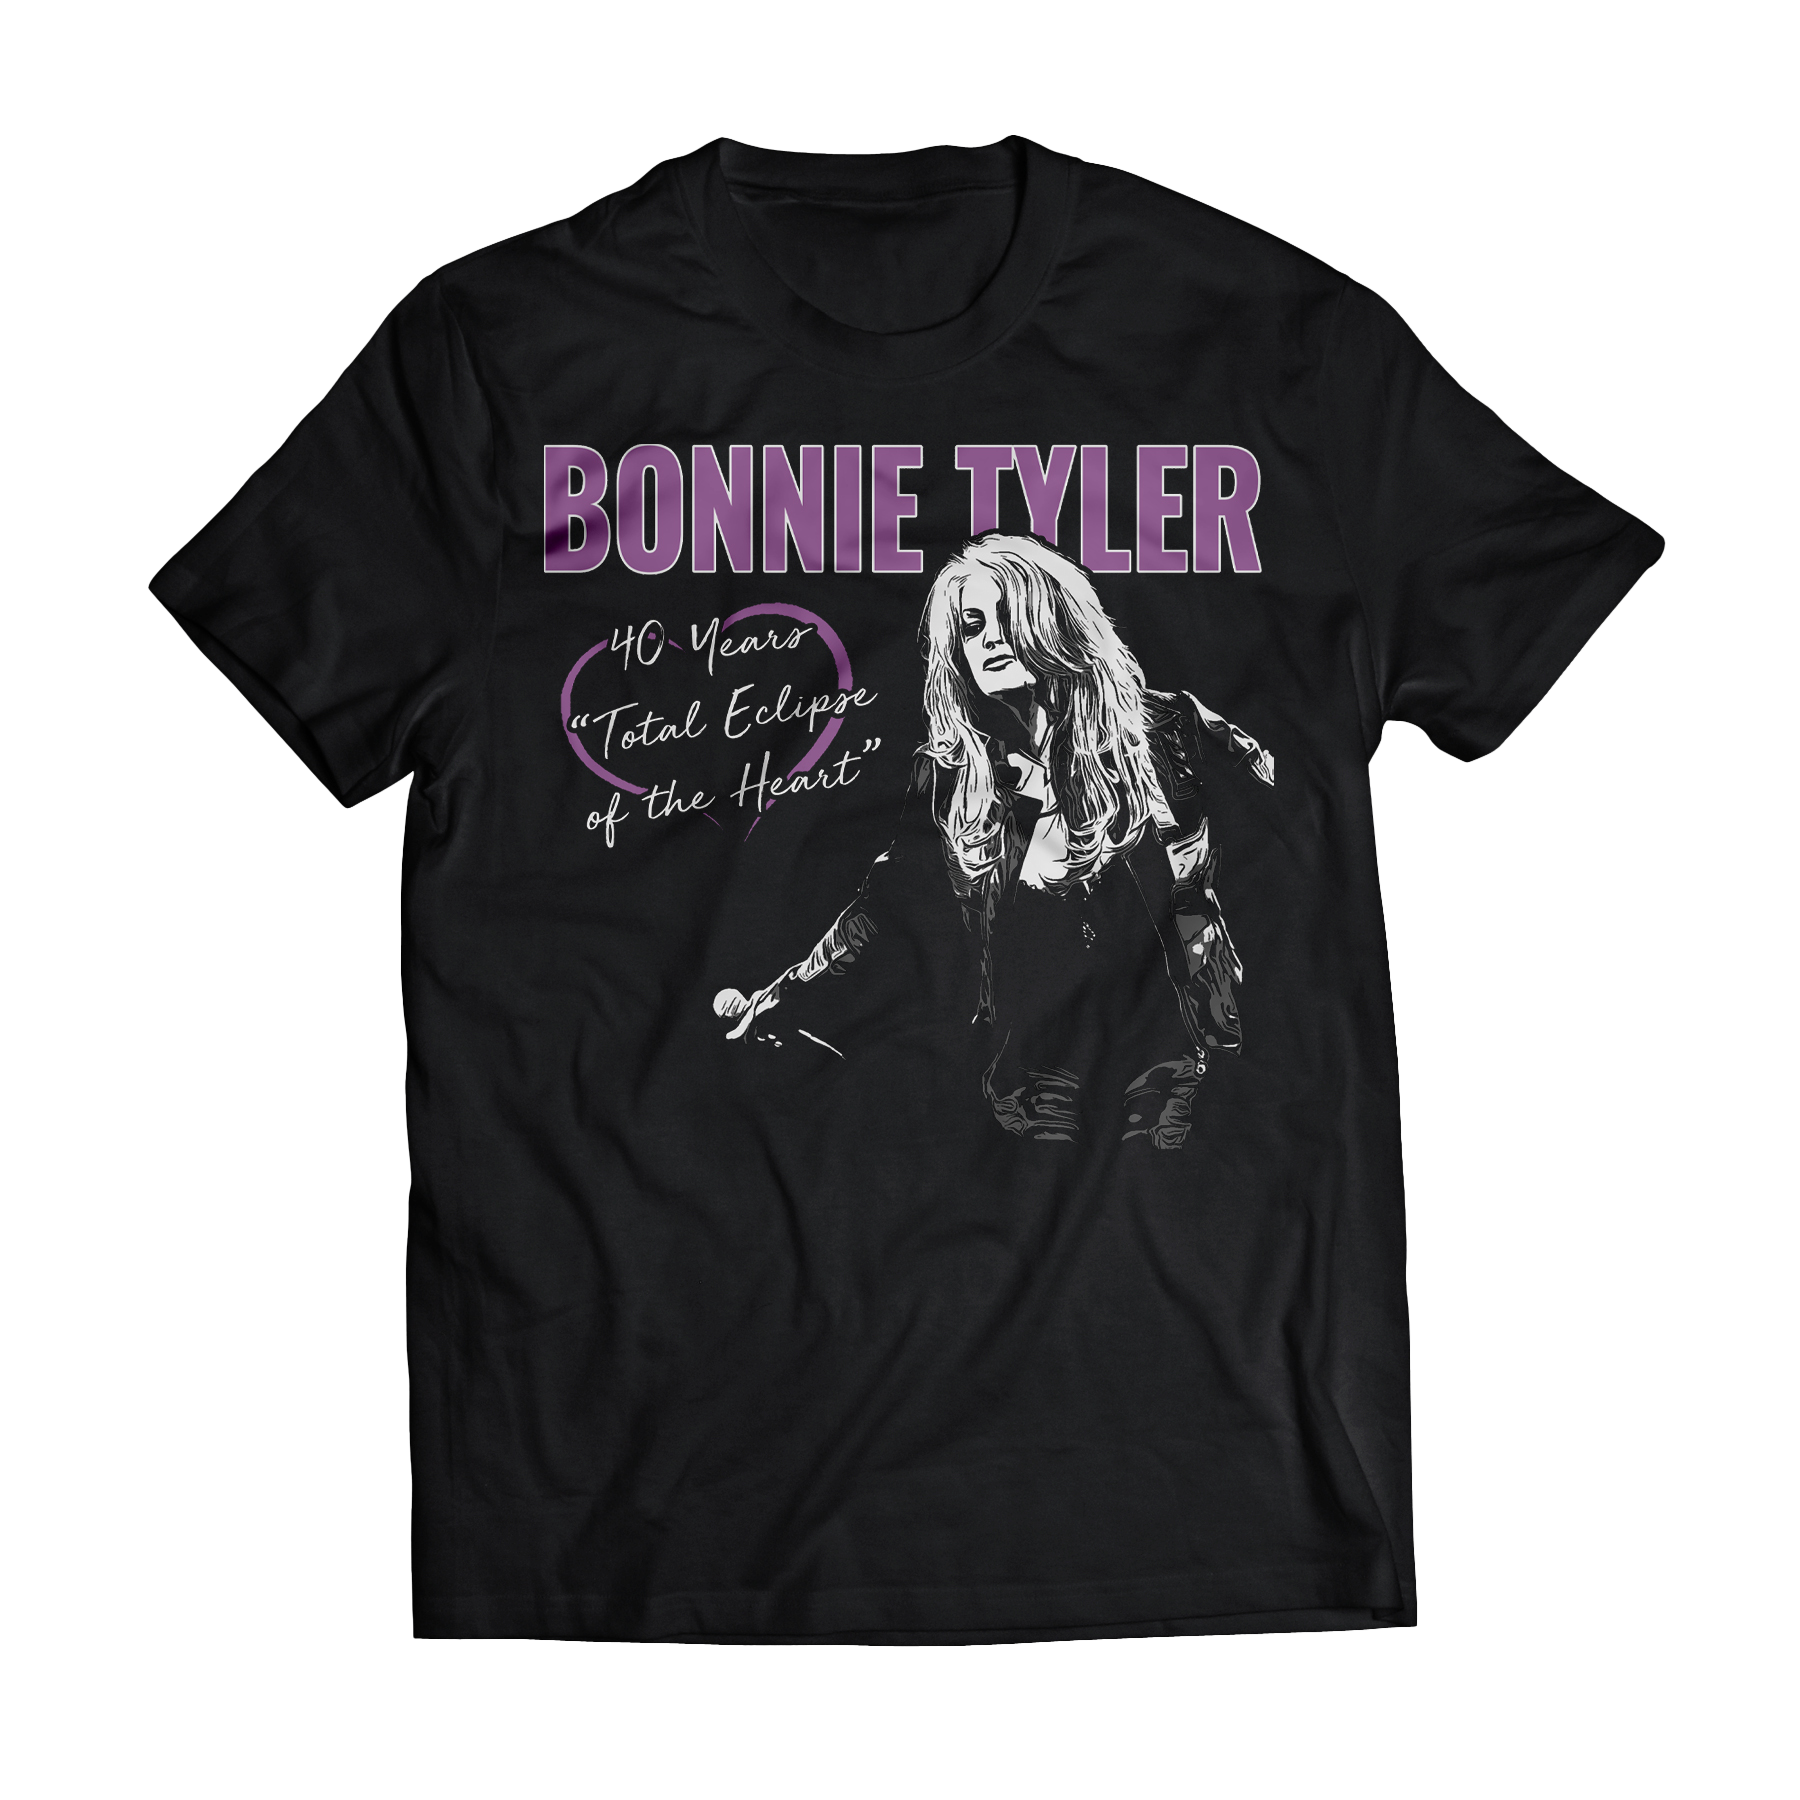 40 Years “Total Eclipse of the Heart” Tour T-Shirt